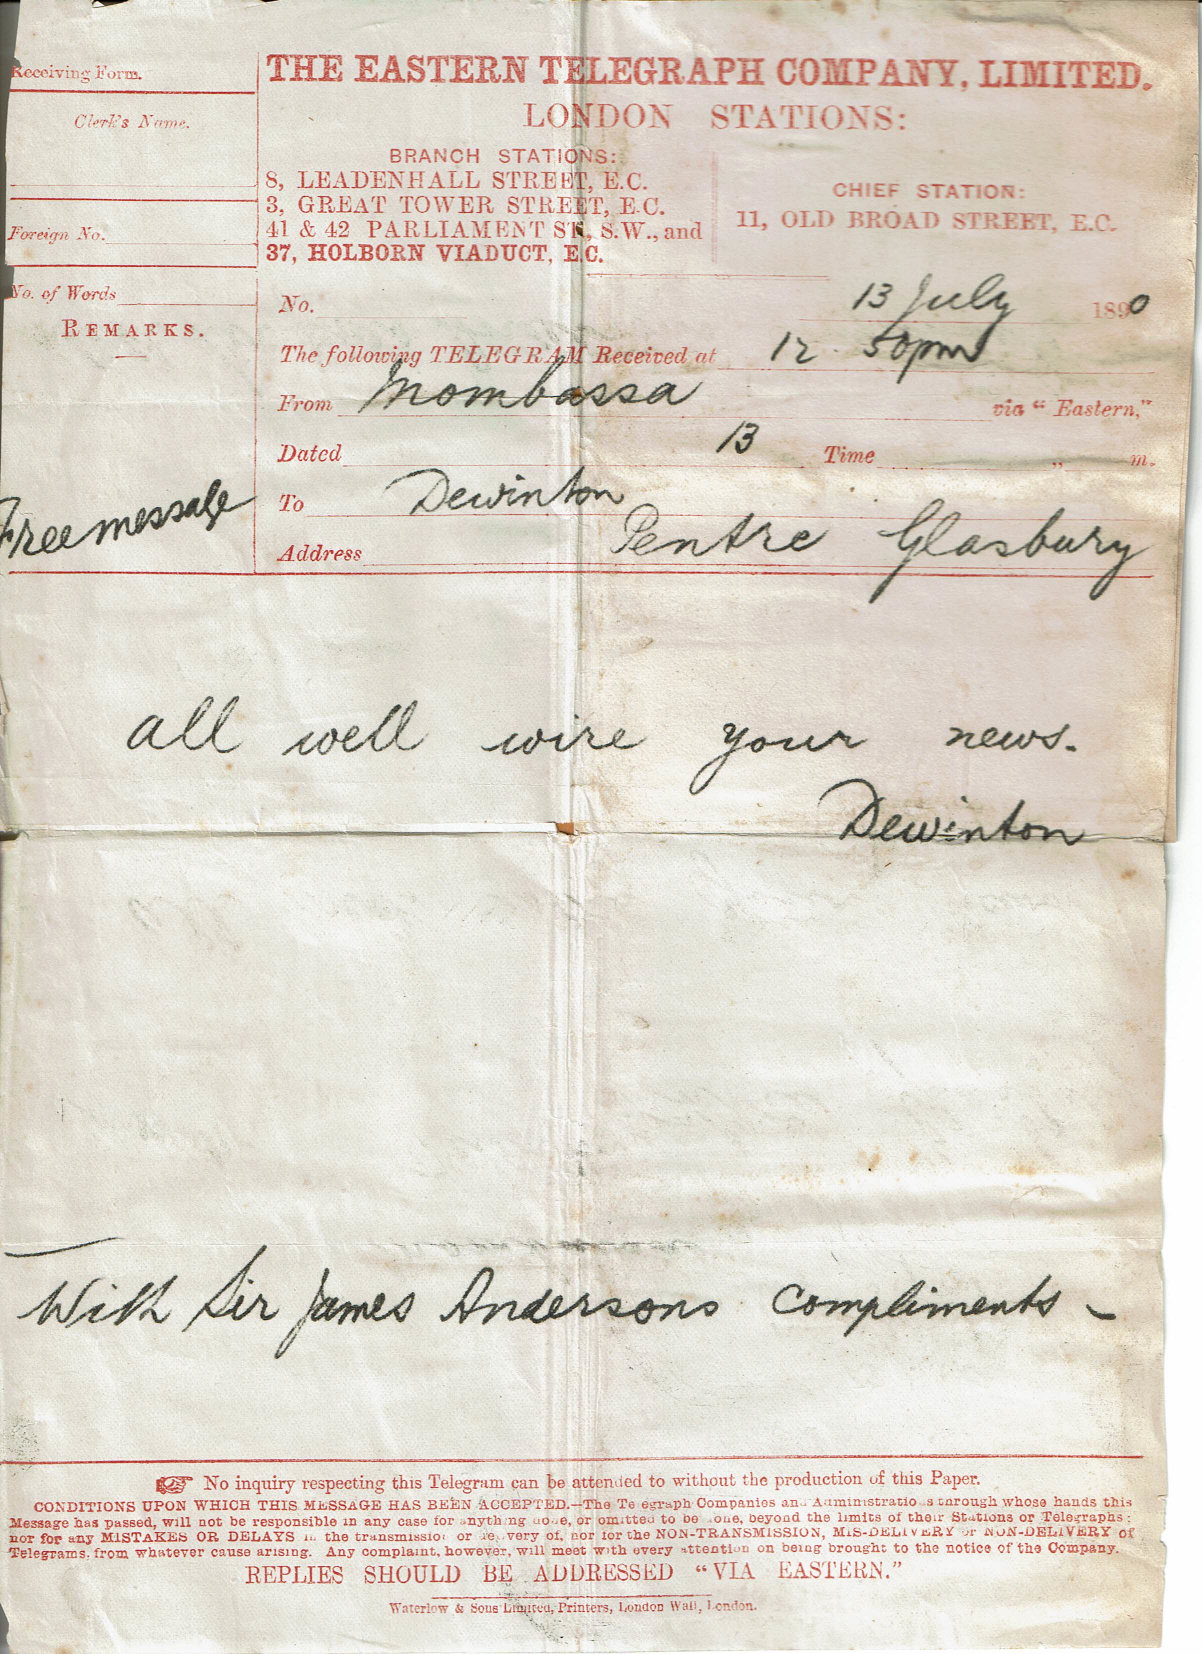 Receiving form 13 July 1900